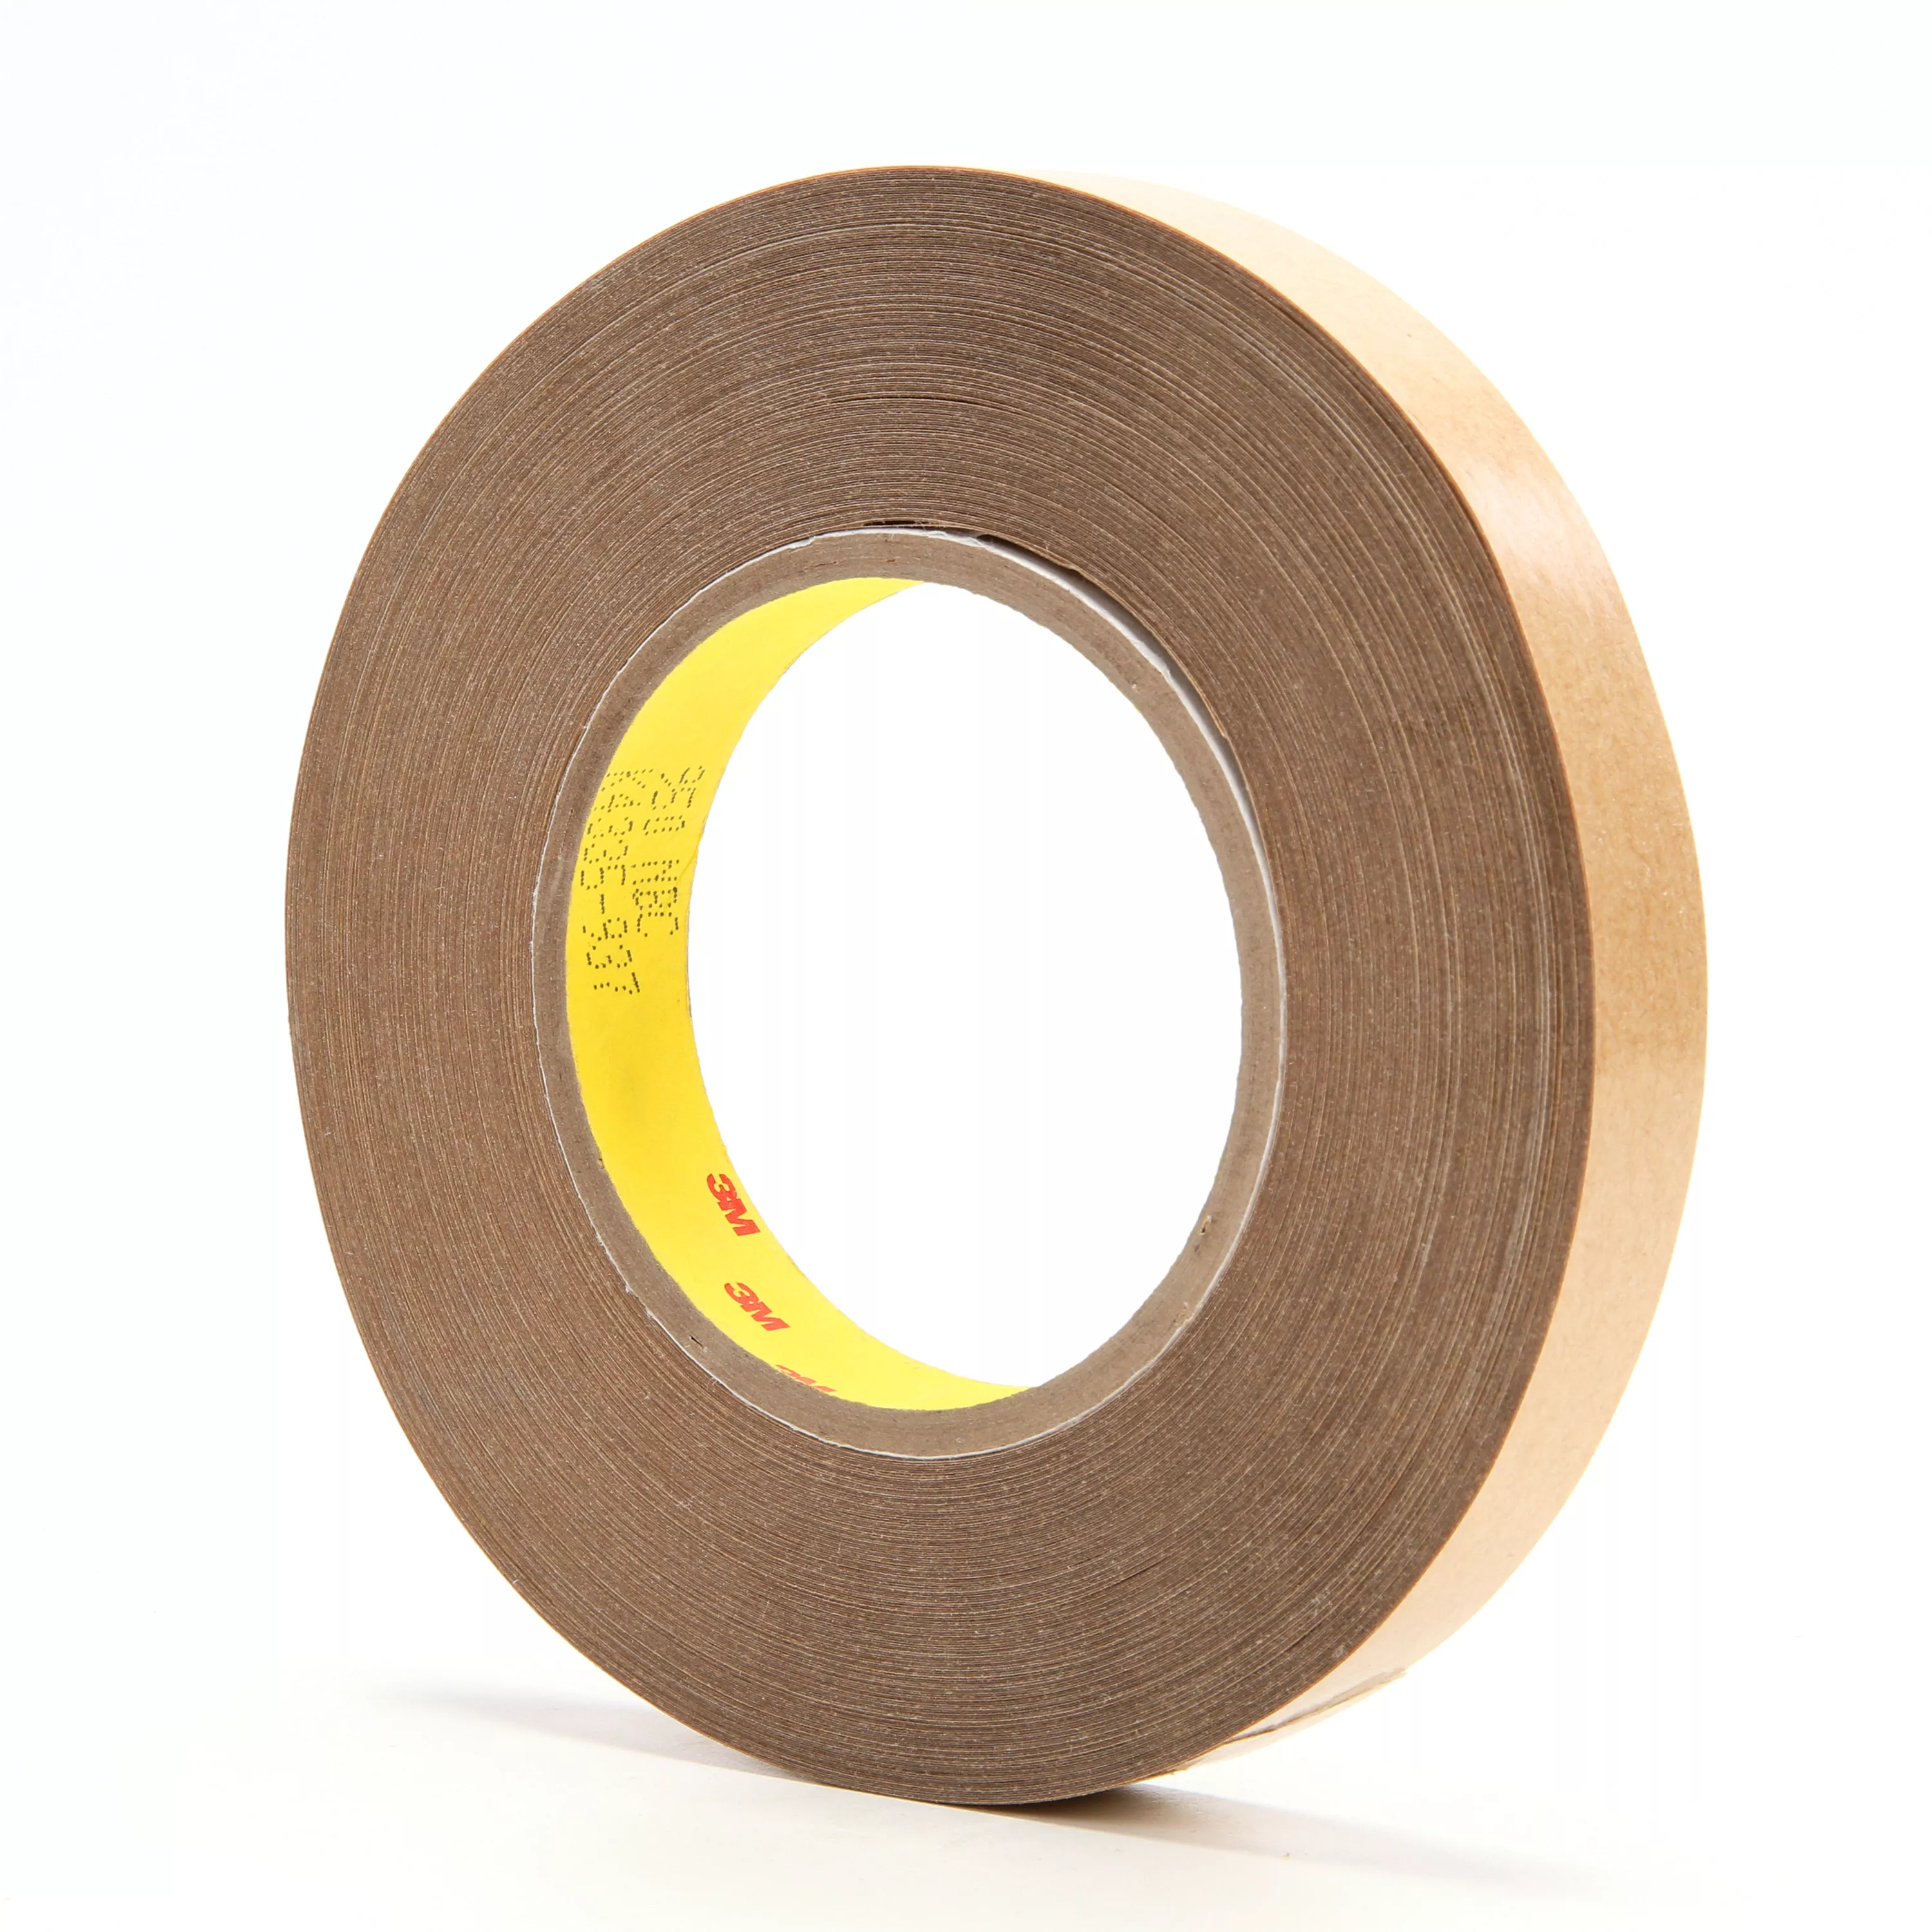 3M™ Adhesive Transfer Tape 950, Clear, 3/4 in x 60 yd, 5 mil, 48
Roll/Case